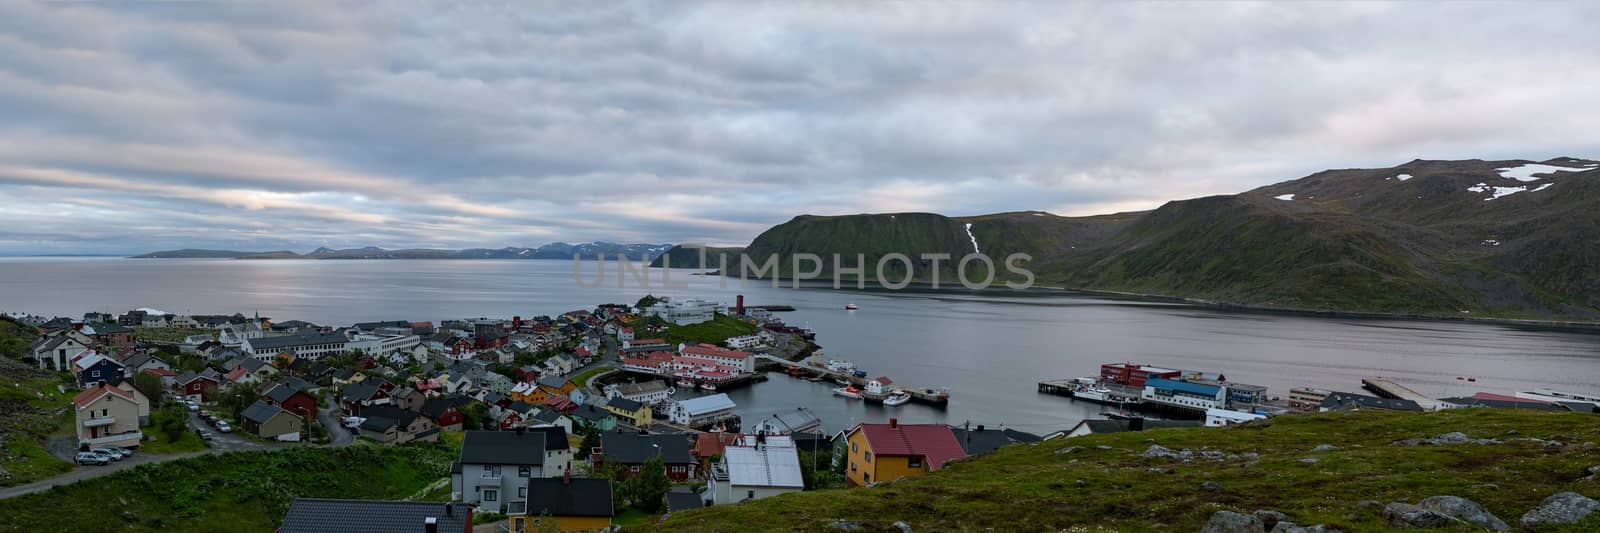 Panoramic view of the city and the port of Honningsvag, Norway